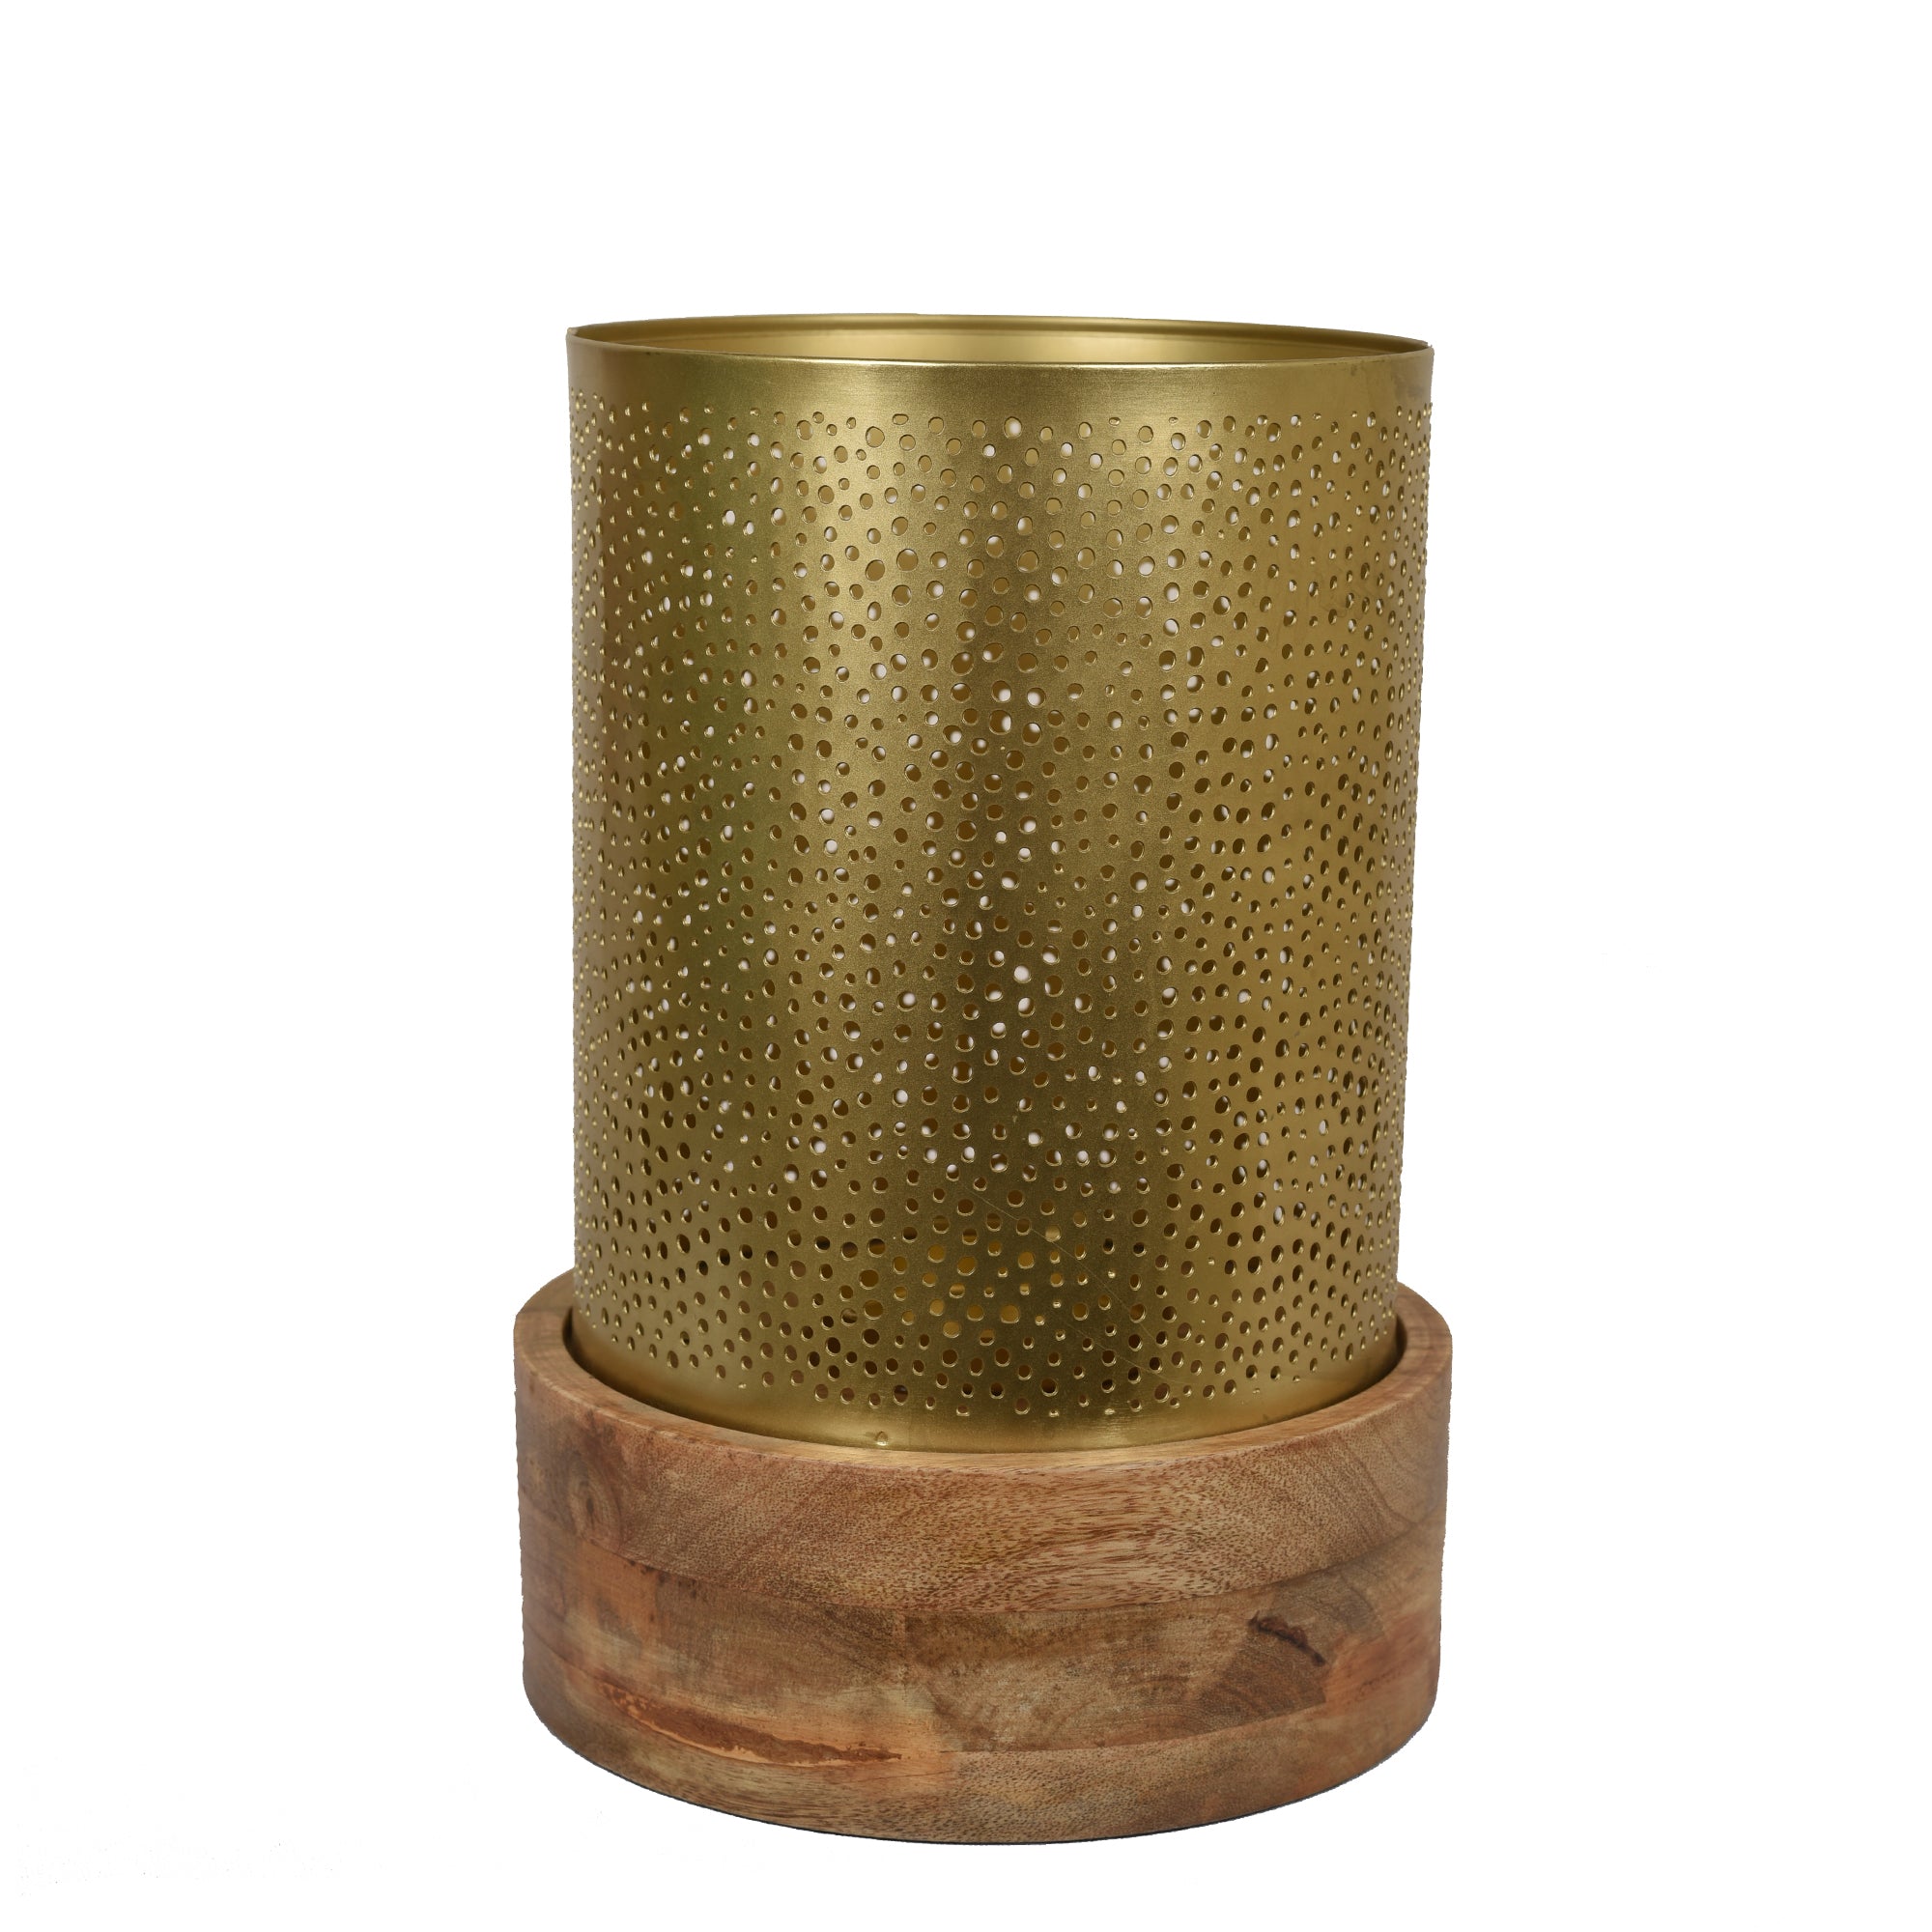 Roshni Jaali Candle Holder with Wooden Base 12 inches